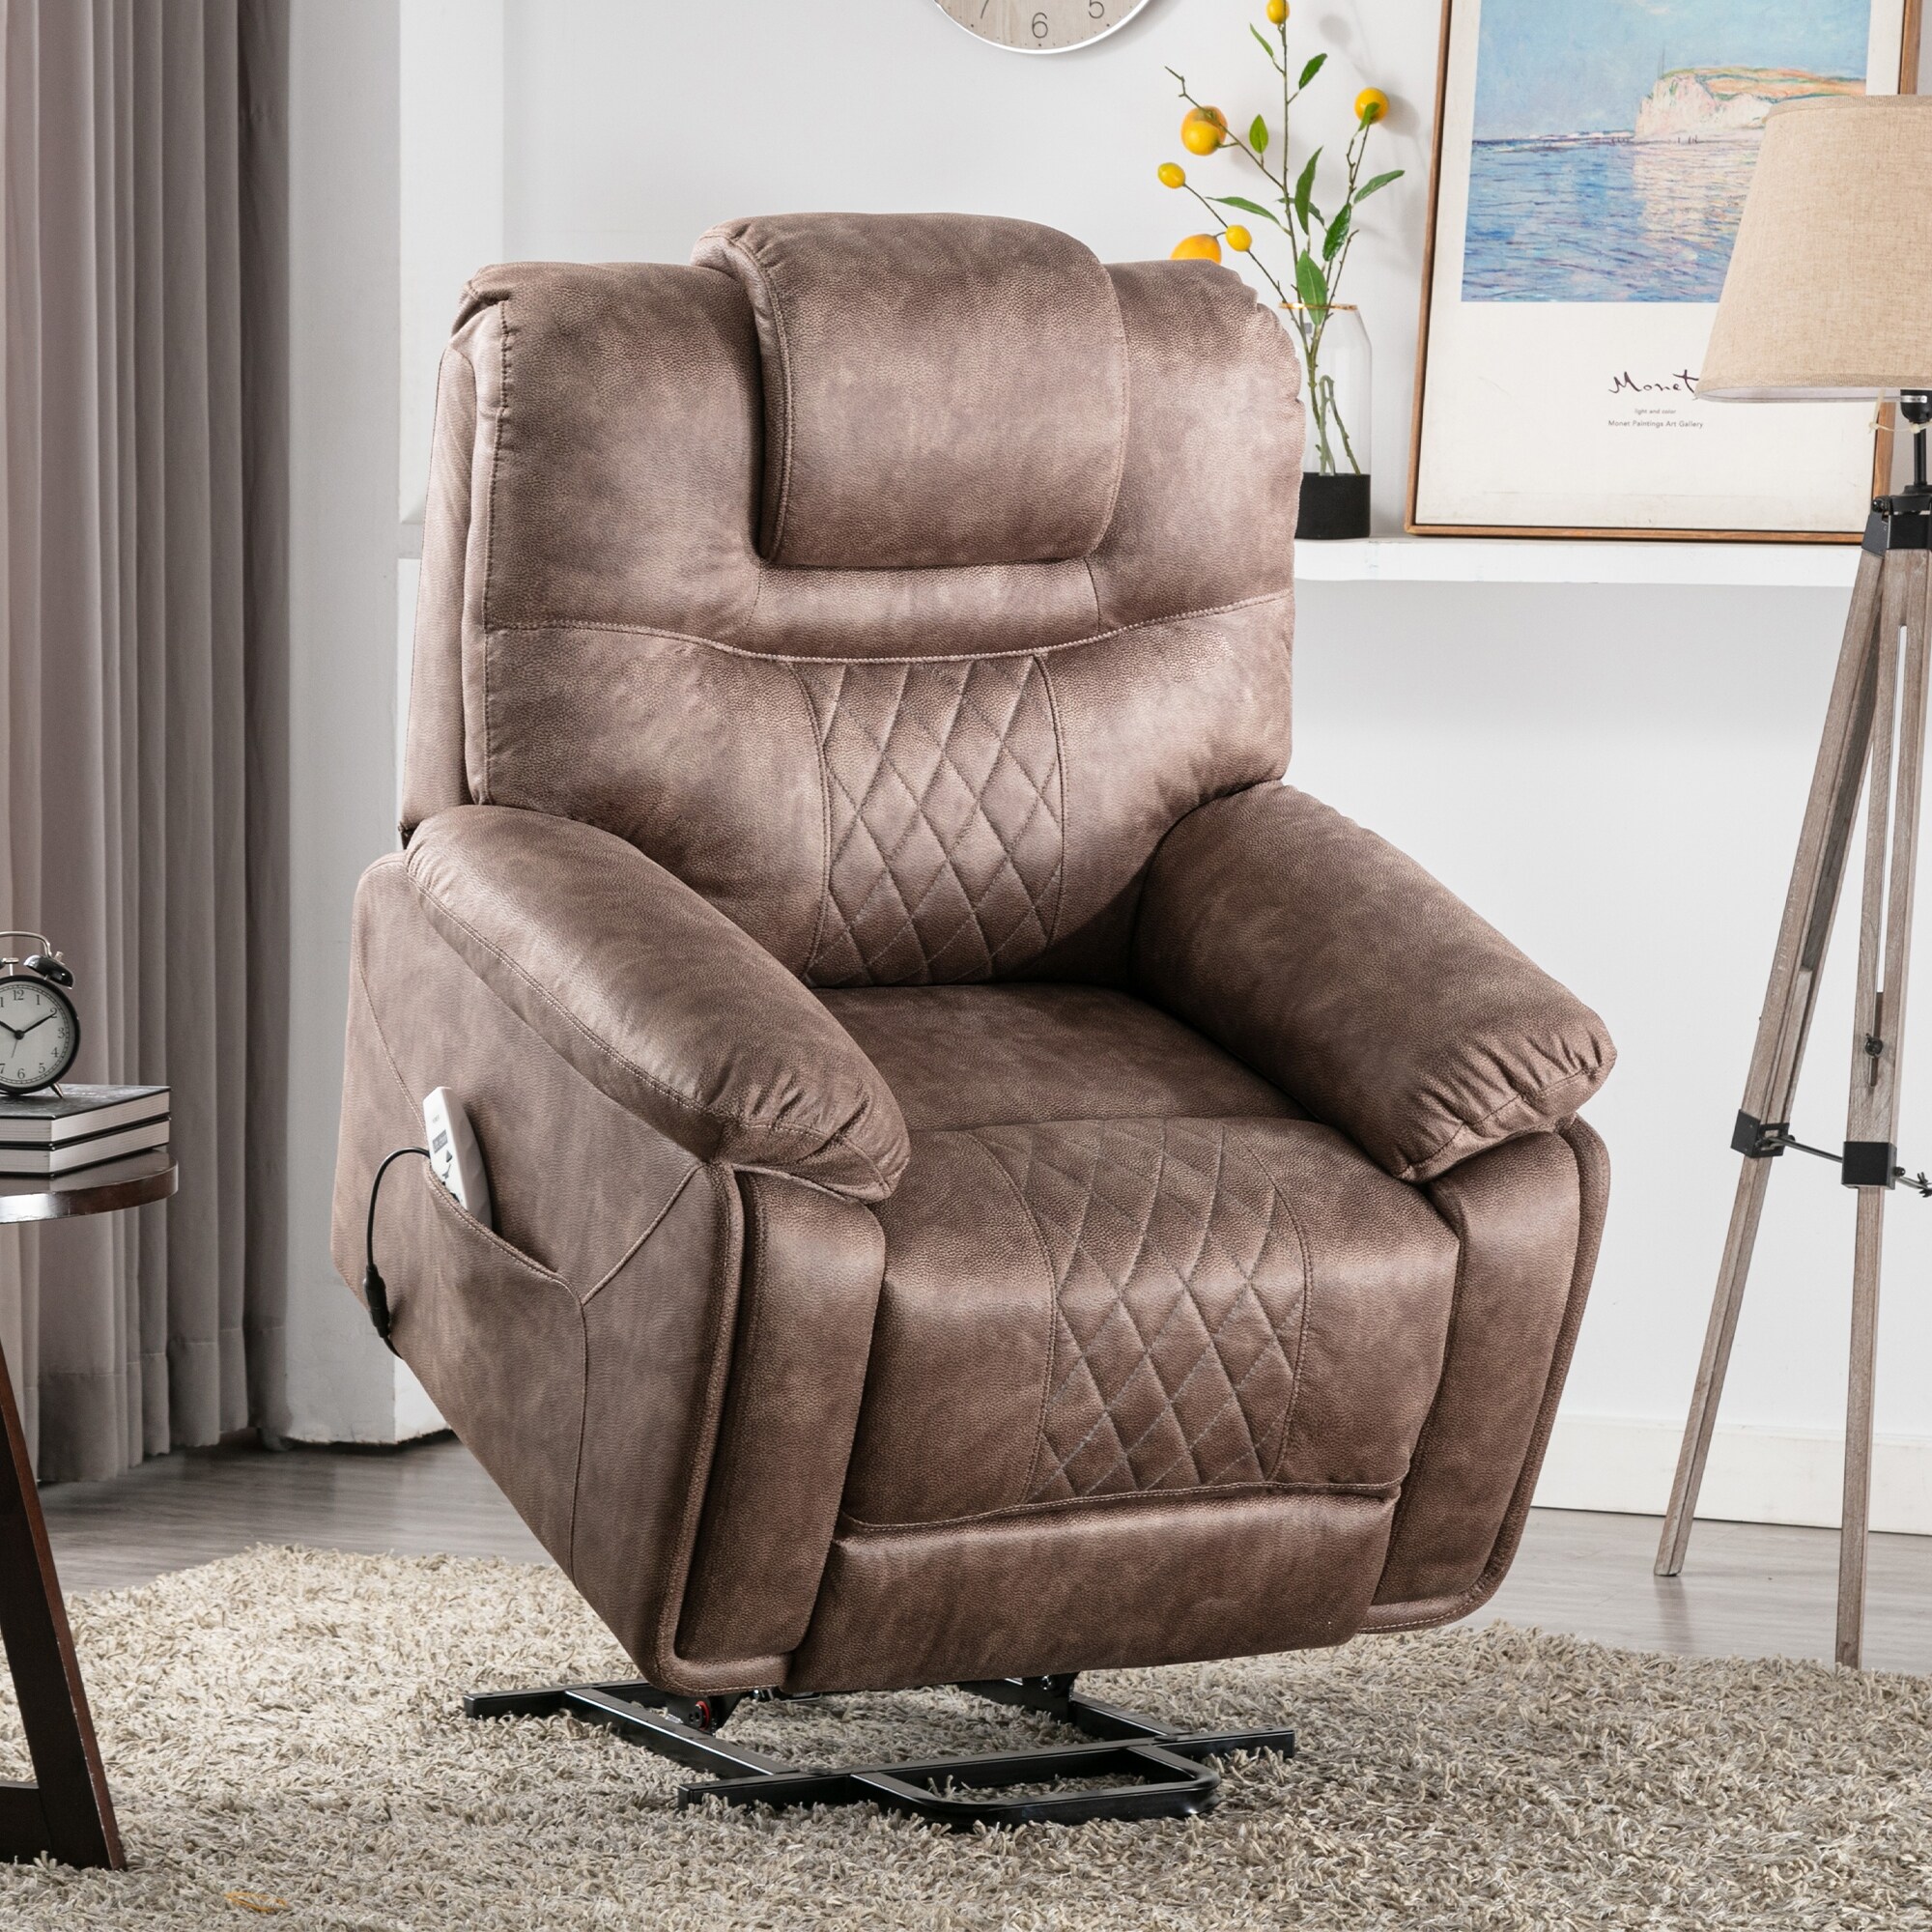 https://ak1.ostkcdn.com/images/products/is/images/direct/1b2824b98b7c48f4c97accc92f3e910f7a411ea7/Modern-Luxury-Style-Power-Lift-Chair-with-Adjustable-Massage-Function%2C-Recliner-Chair-with-Heating-System-for-Living-Room.jpg